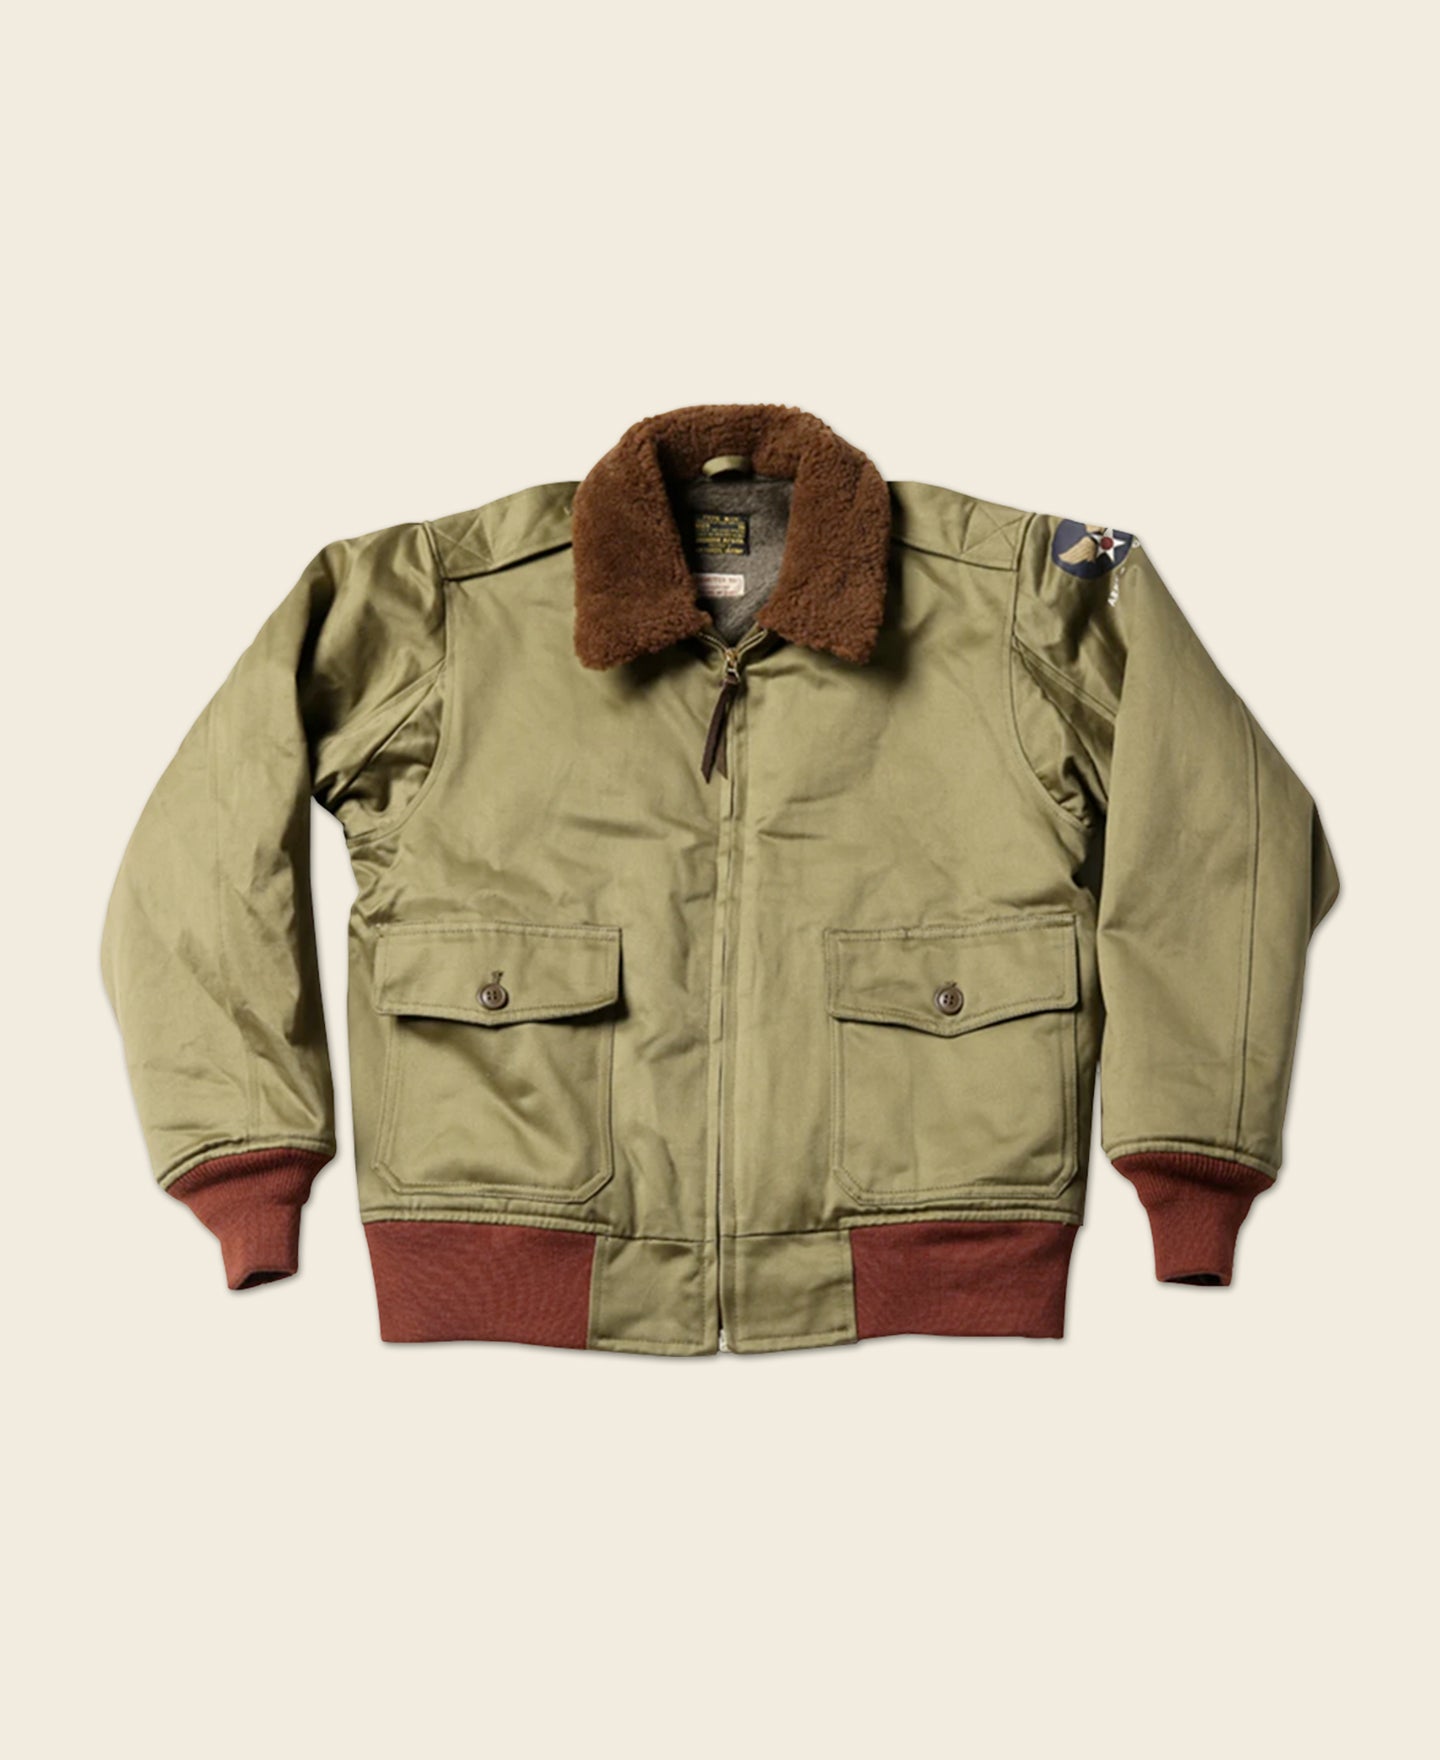 A2 Brown Bomber Jacket 9 Patch 3T by Aircraft Spruce